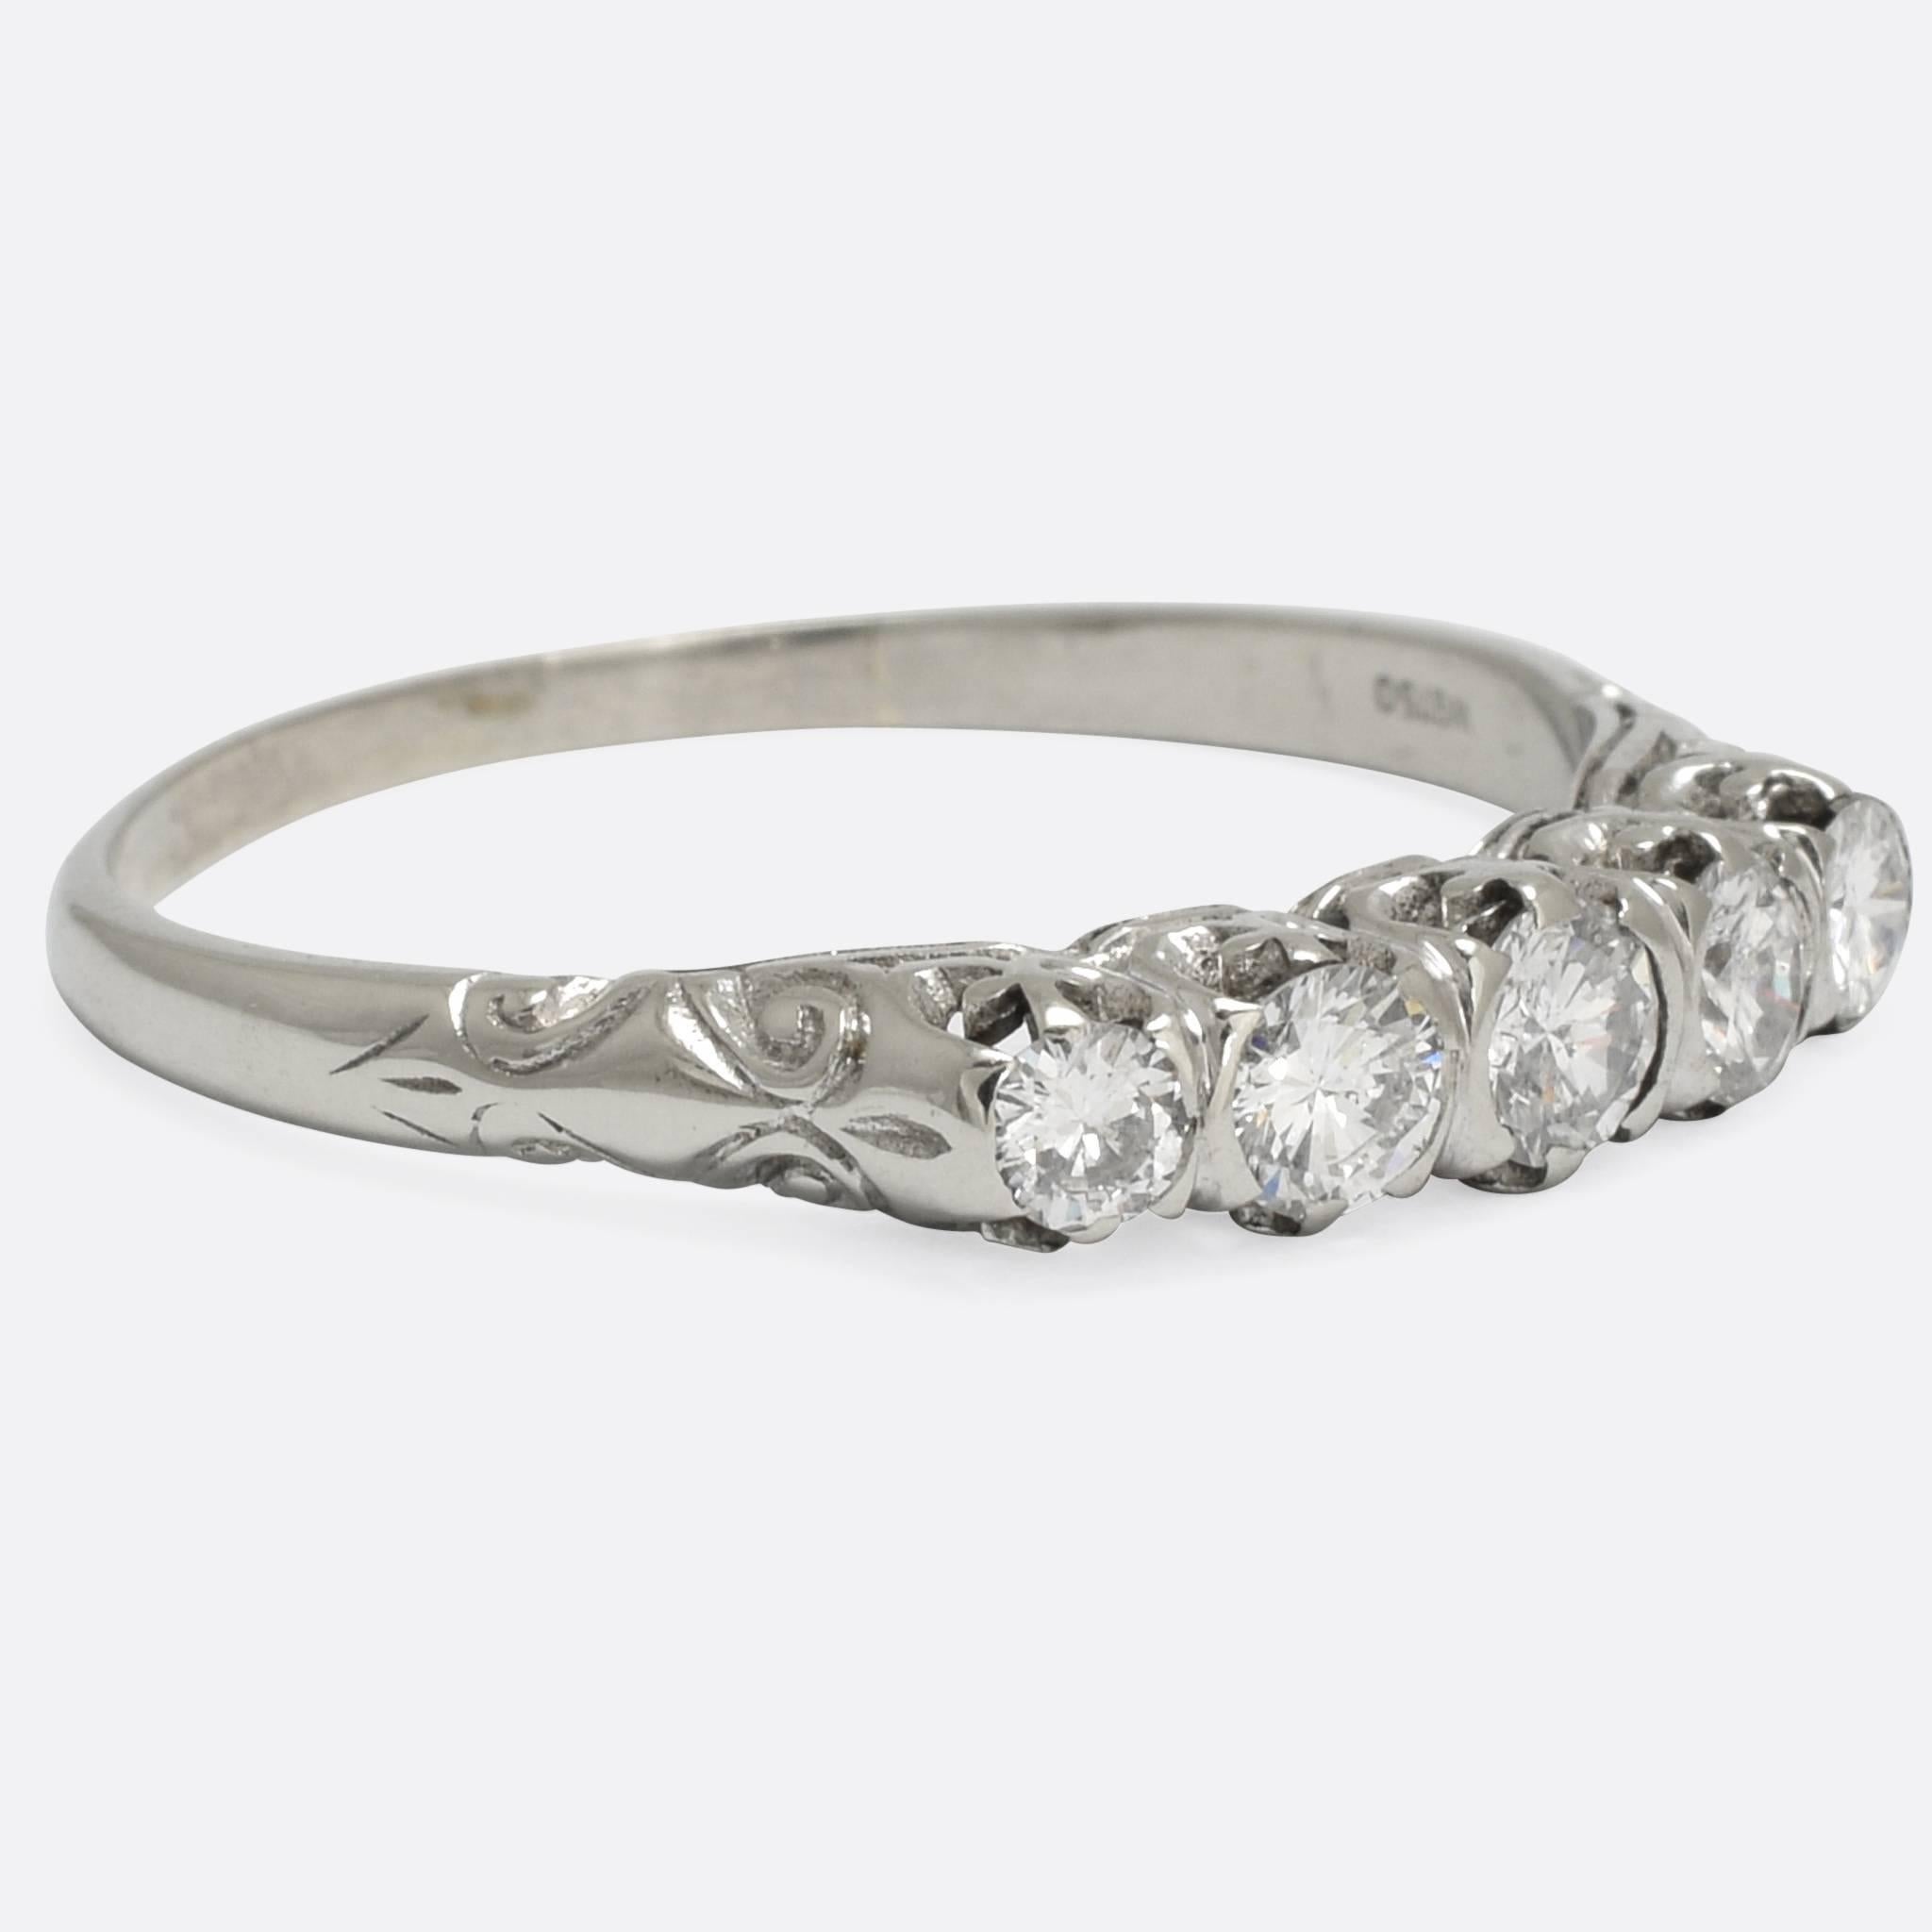 An elegant vintage engagement ring, set with five modern brilliant cut diamonds that total .56ct in weight. The ring has been modelled in the Victorian style, with hand chased scrolled detail to the shoulders and pretty trefoil claw mounts. Unusual